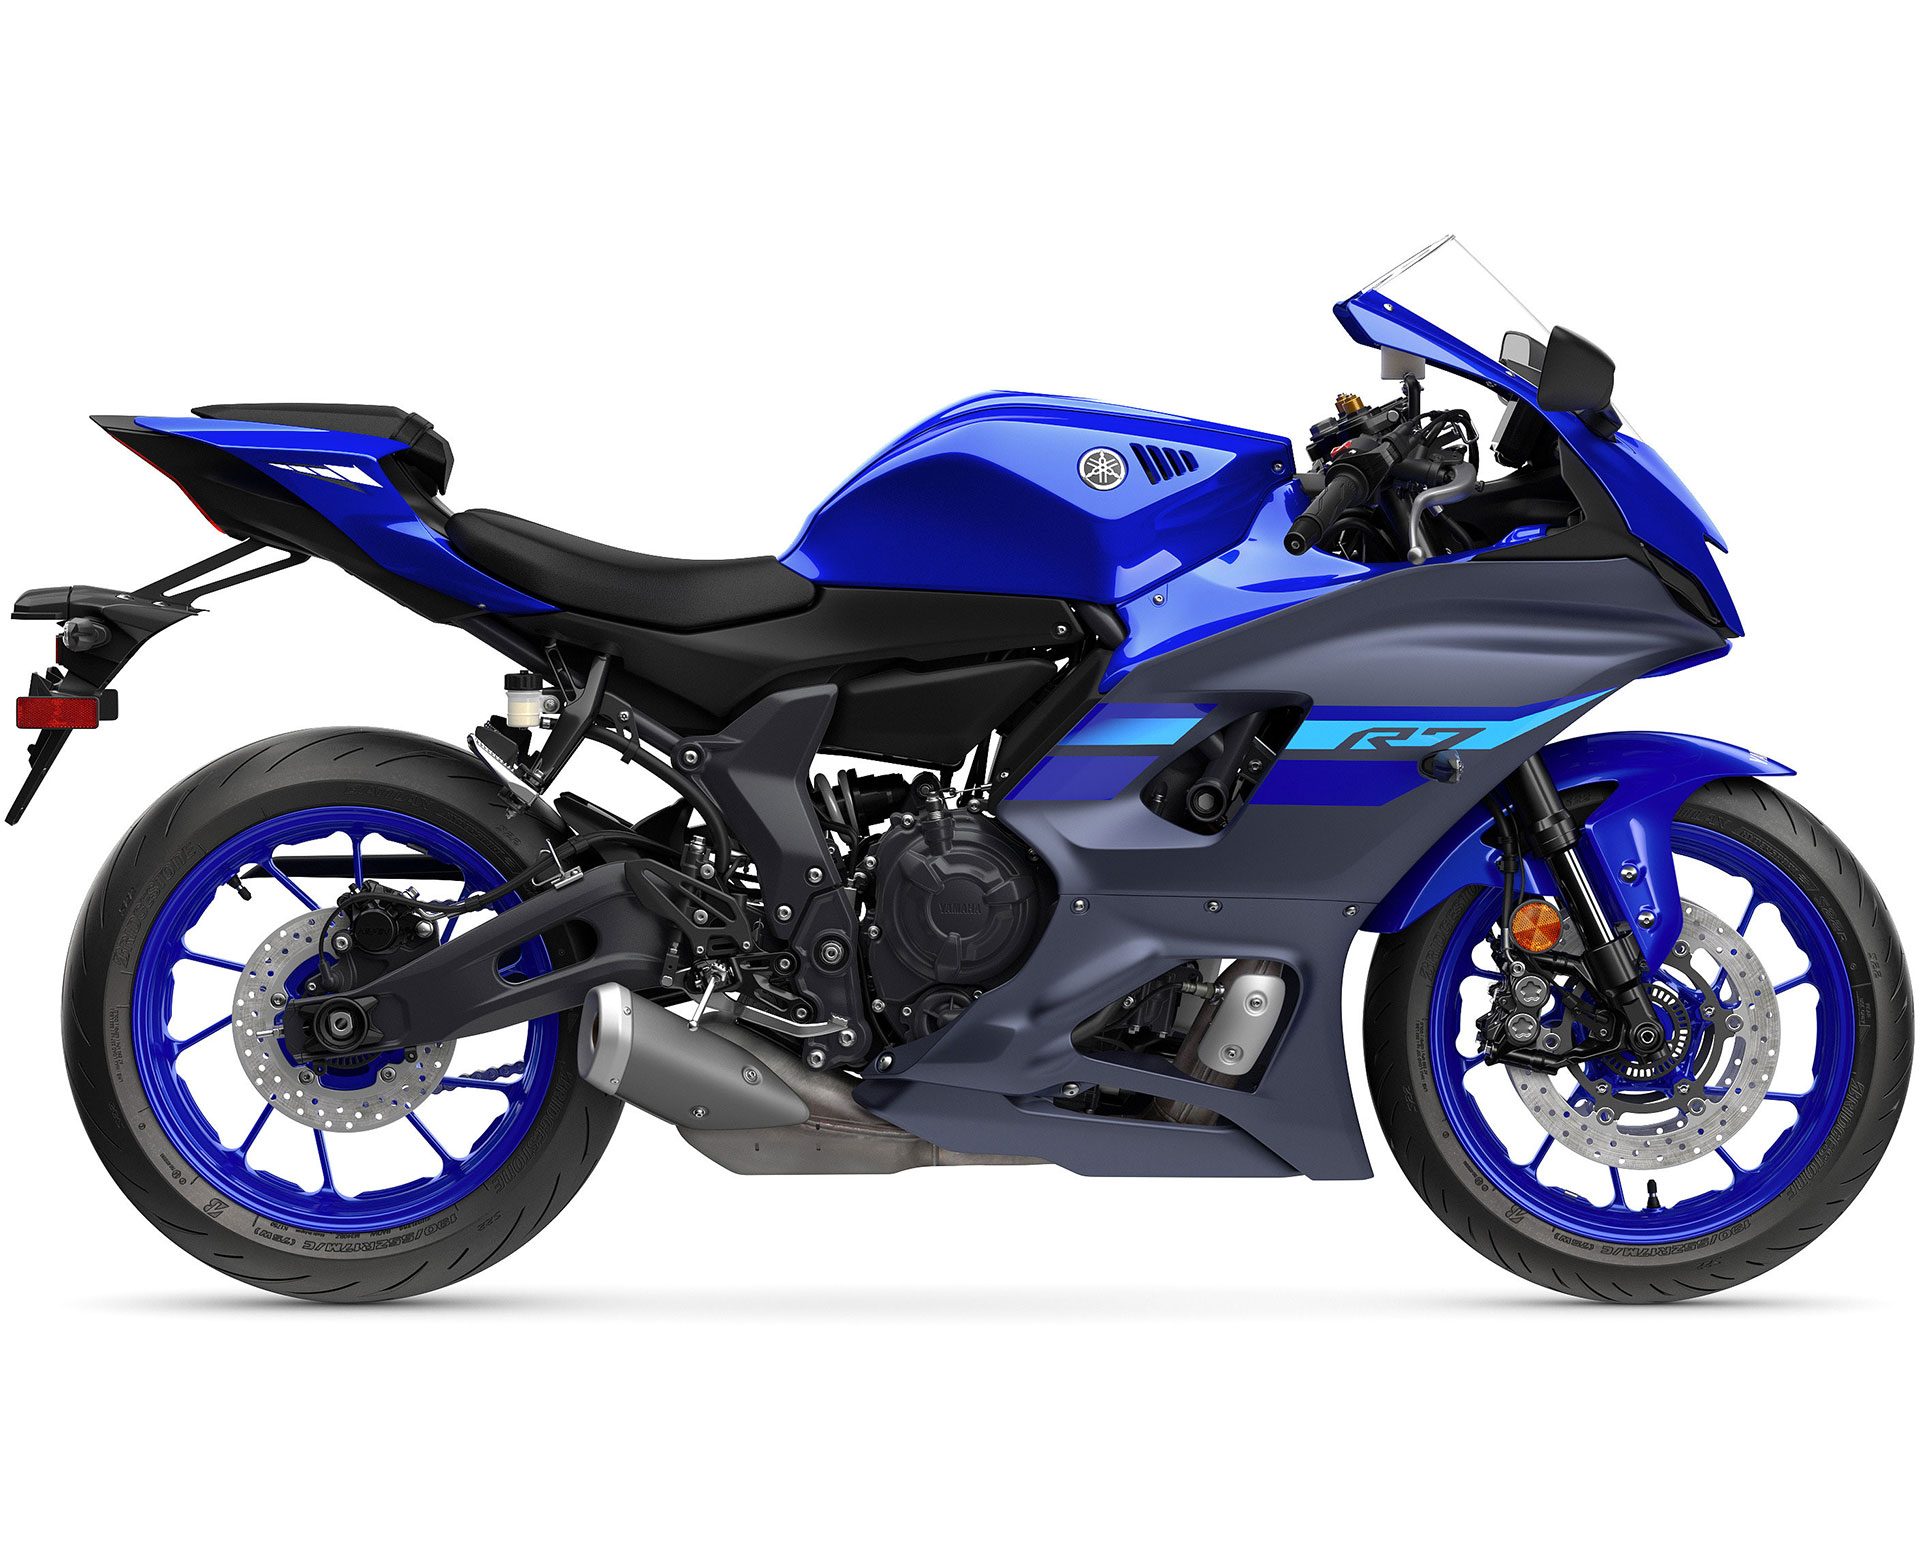 Thumbnail of your customized 2024 YZF-R7